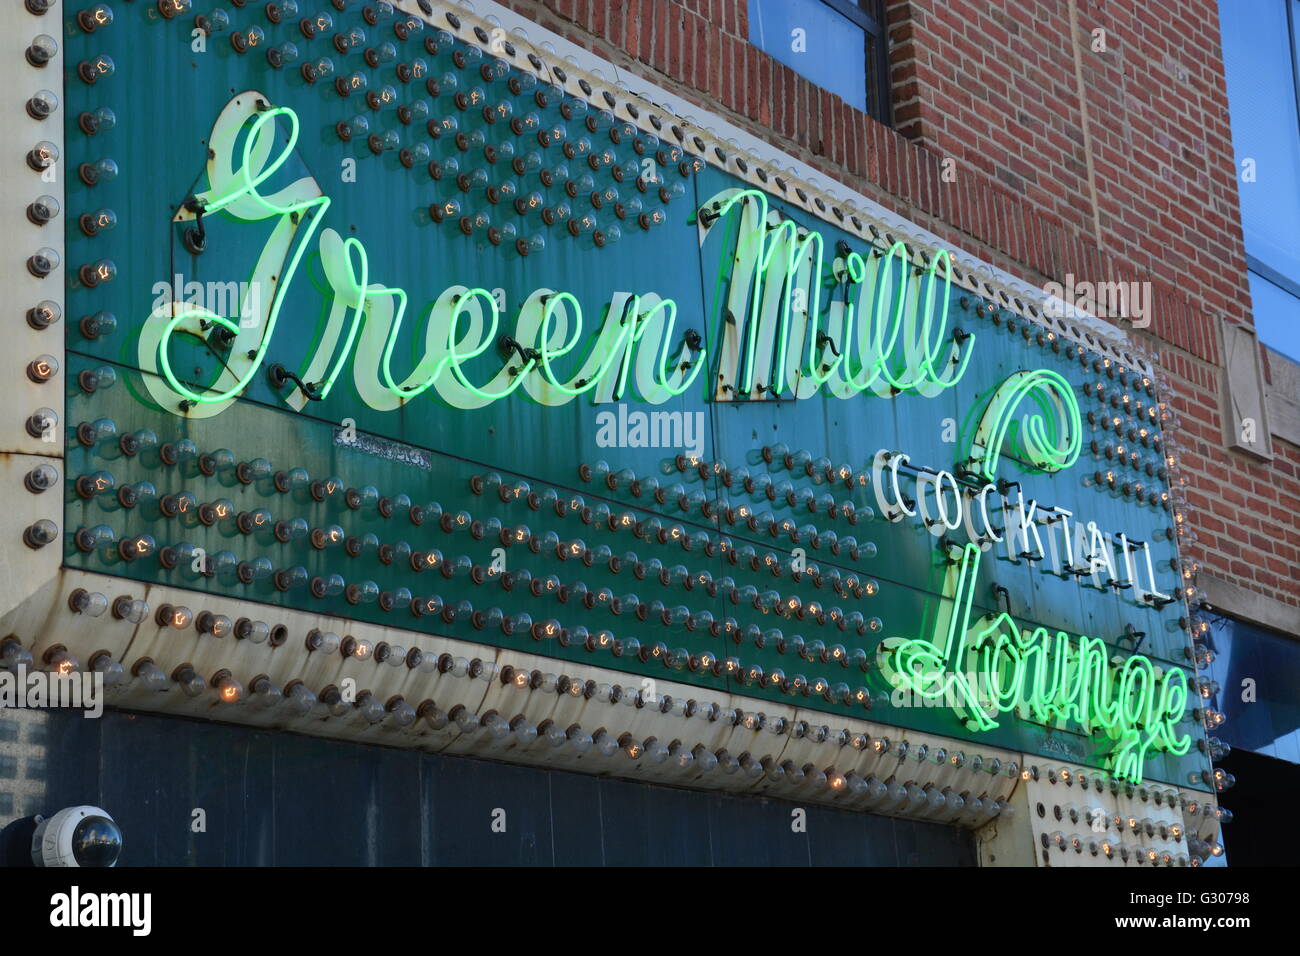 The Green Mill Tavern in Chicago's Uptown Neighborhood has been open over 100-years and was an Al Capone speak easy during prohibition. Stock Photo